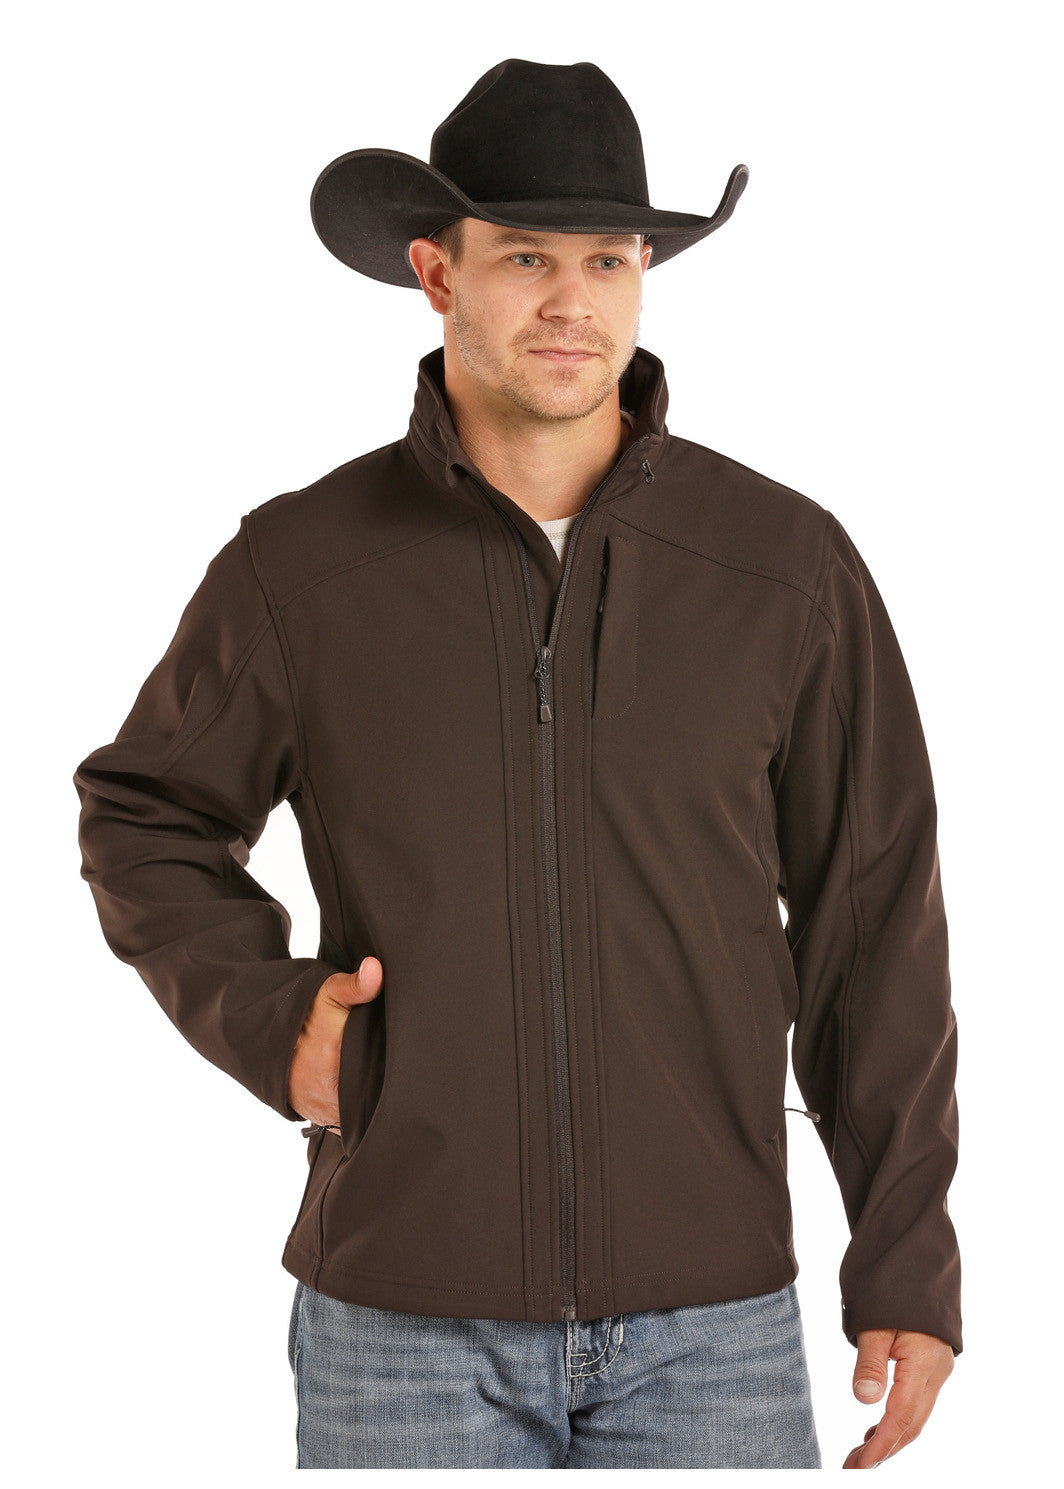 Panhandle Slim Men's Outfitters Cloth Jacket